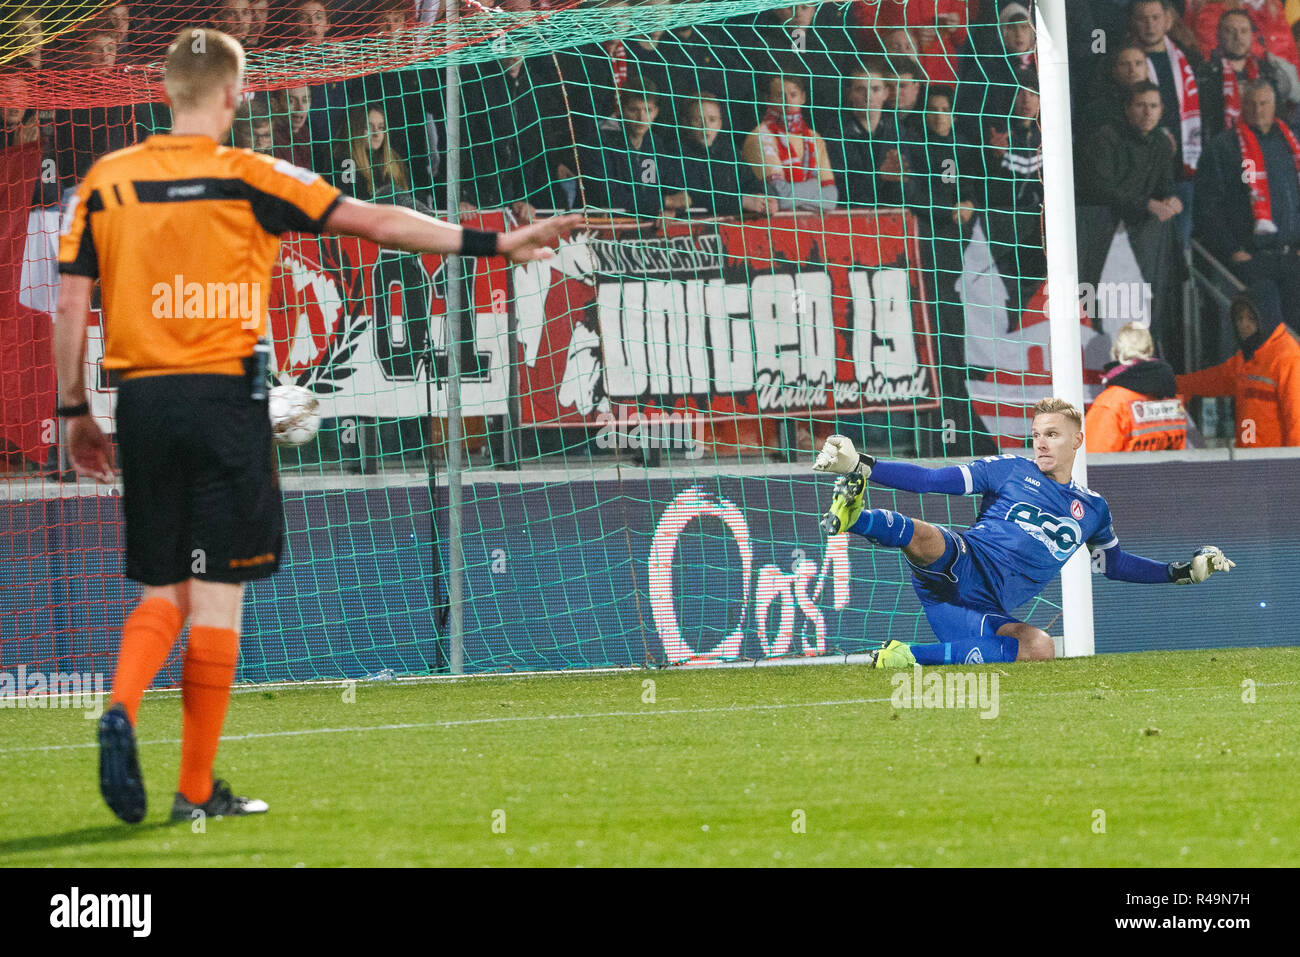 24.11.2018, Belgium, Oostende: Kortrijk's goalkeeper Thomas Kaminski fails to stop a penalty during a soccer match between KV Oostende and KV Kortrijk, Saturday 24 November 2018 in Ostend, on the 16th day of the 'Jupiler Pro League' Belgian soccer championship season 2018-2019. BELGA PHOTO KURT DESPLENTER Photo: Kurt Desplenter/BELGA/dpa | Stock Photo